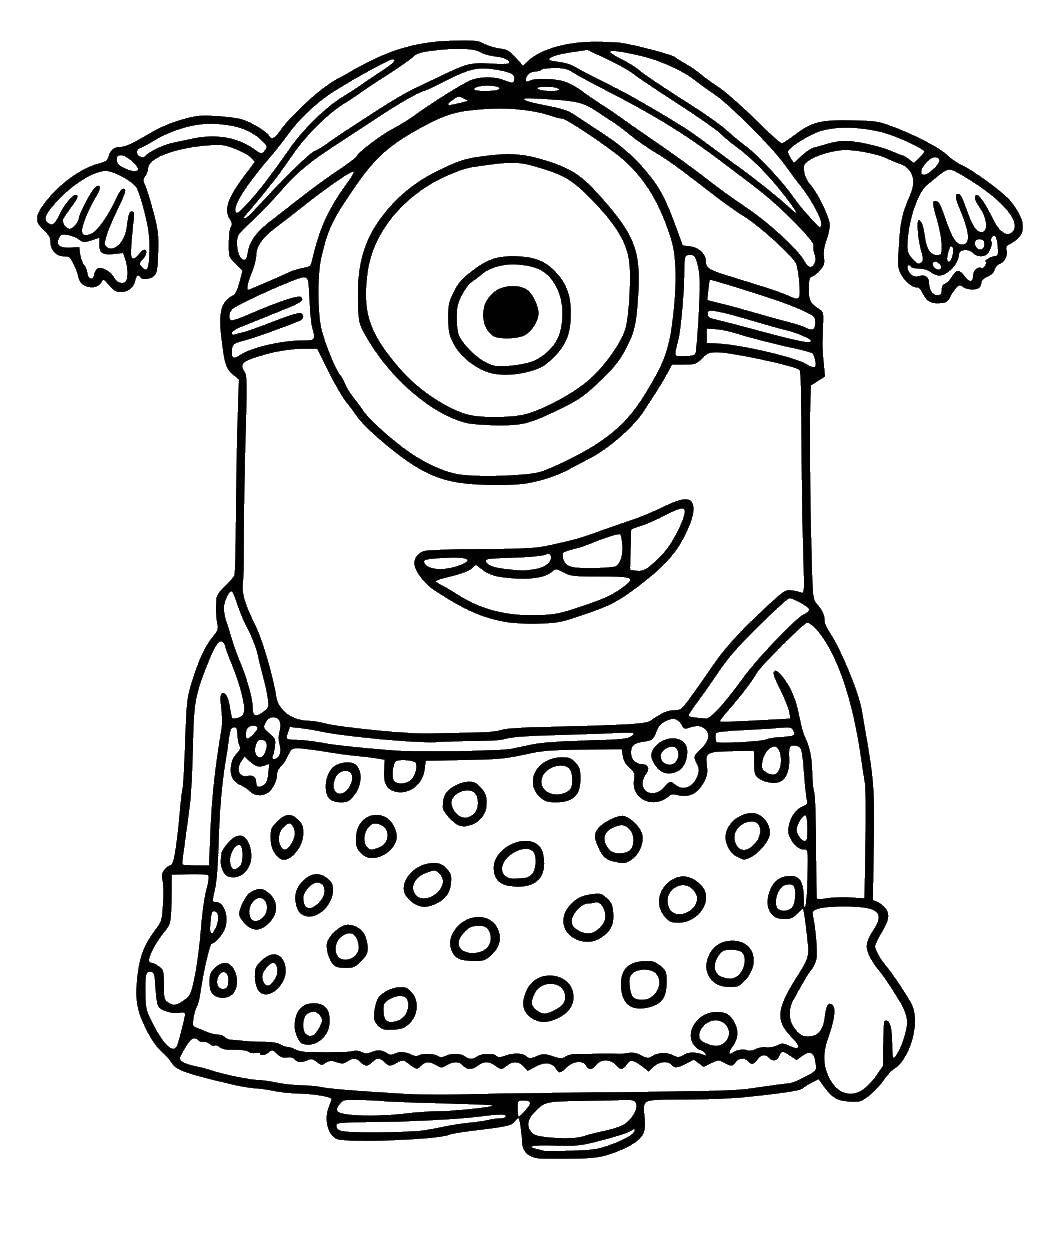 Coloring Minion girl. Category the minions. Tags:  the minions.